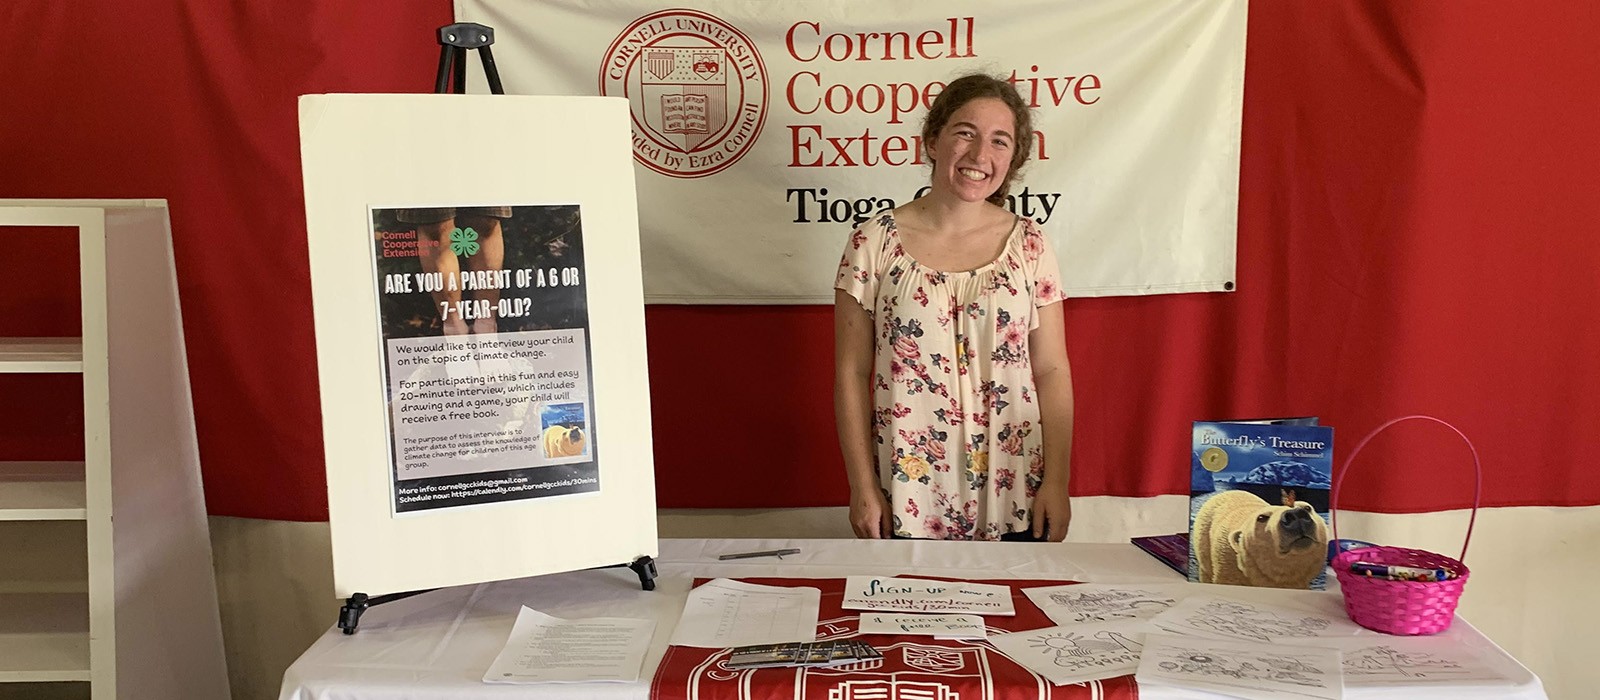 woman at a table with Cornell Cooperative Extension sign behind her